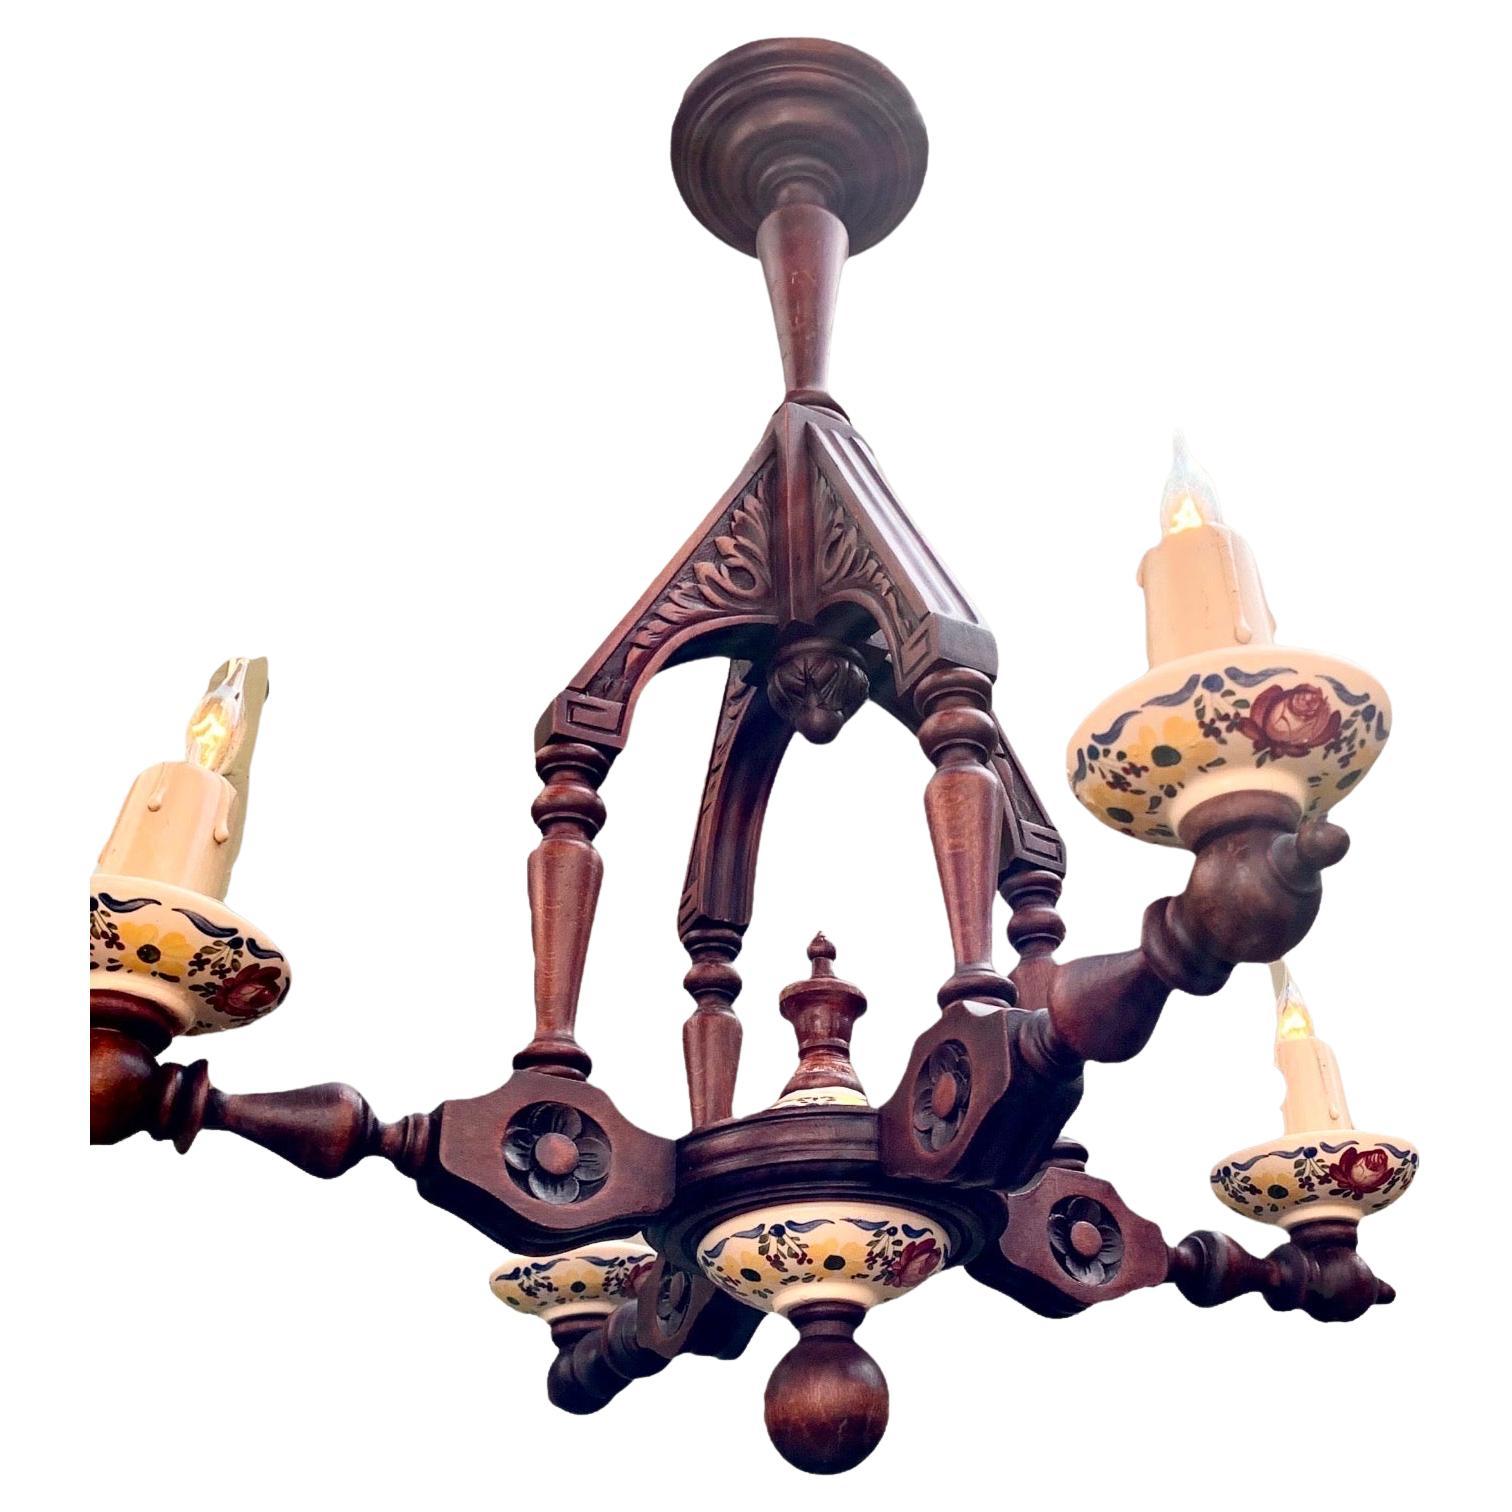 An antique, early 20th century French hand-carved and turned walnut chandelier having delightful and unusual hand-painted faïence bobesch and matching faïence center cups and ball finial. The original and hand-made faïence cups are the show stopper